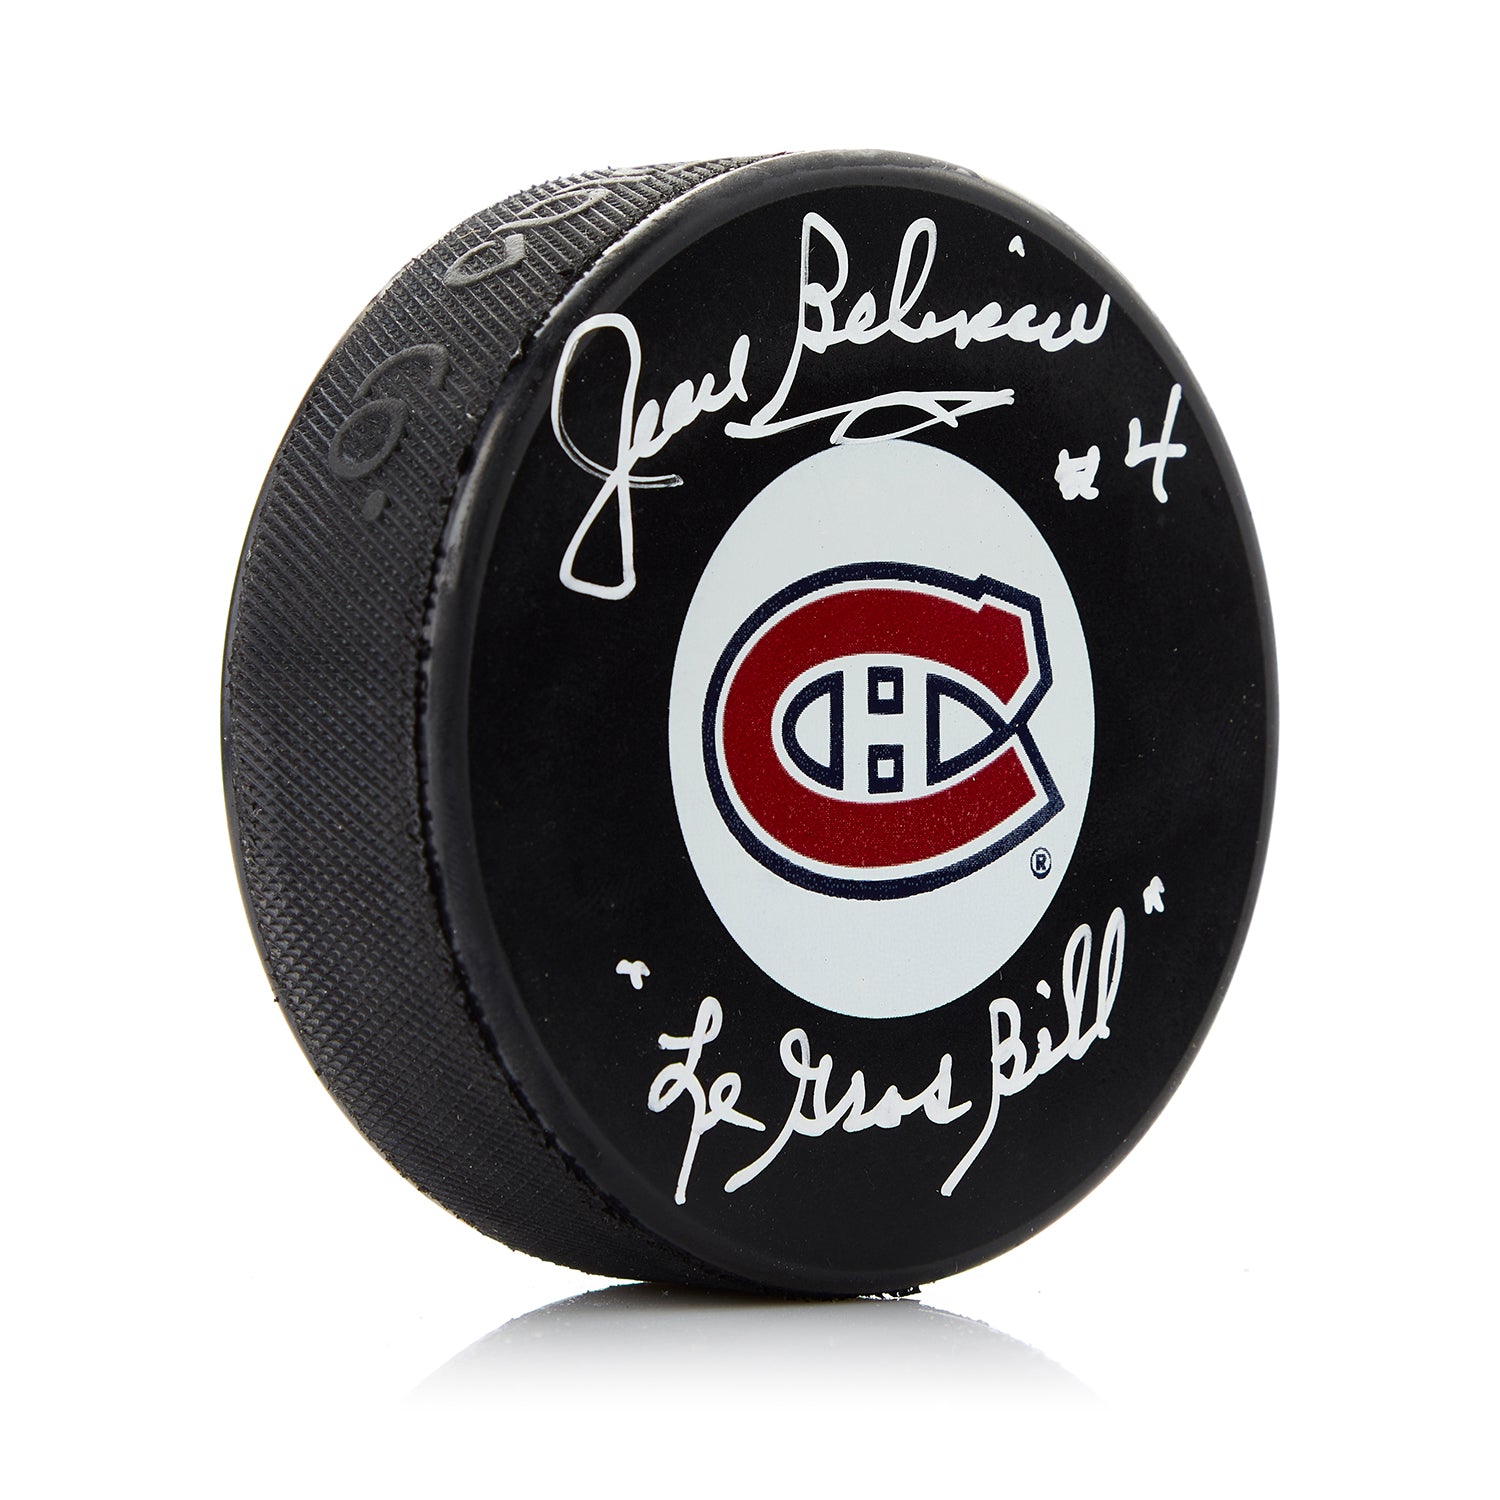 Jean Beliveau Montreal Canadiens Autographed Puck with Le Gros Bill Note